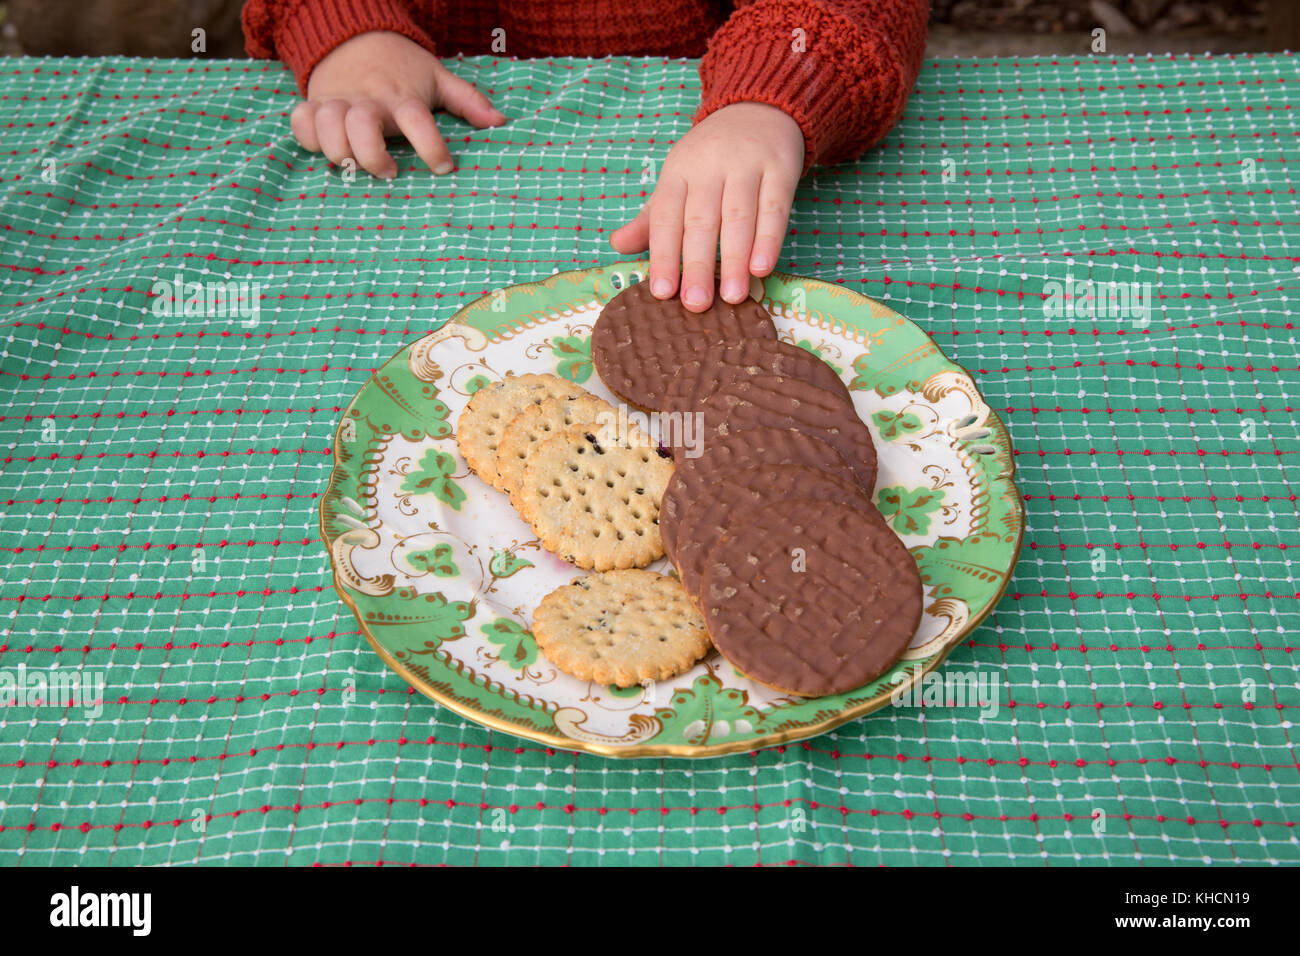 Boy at table choosing chocolate biscuit from plate, cropped detail Stock Photo